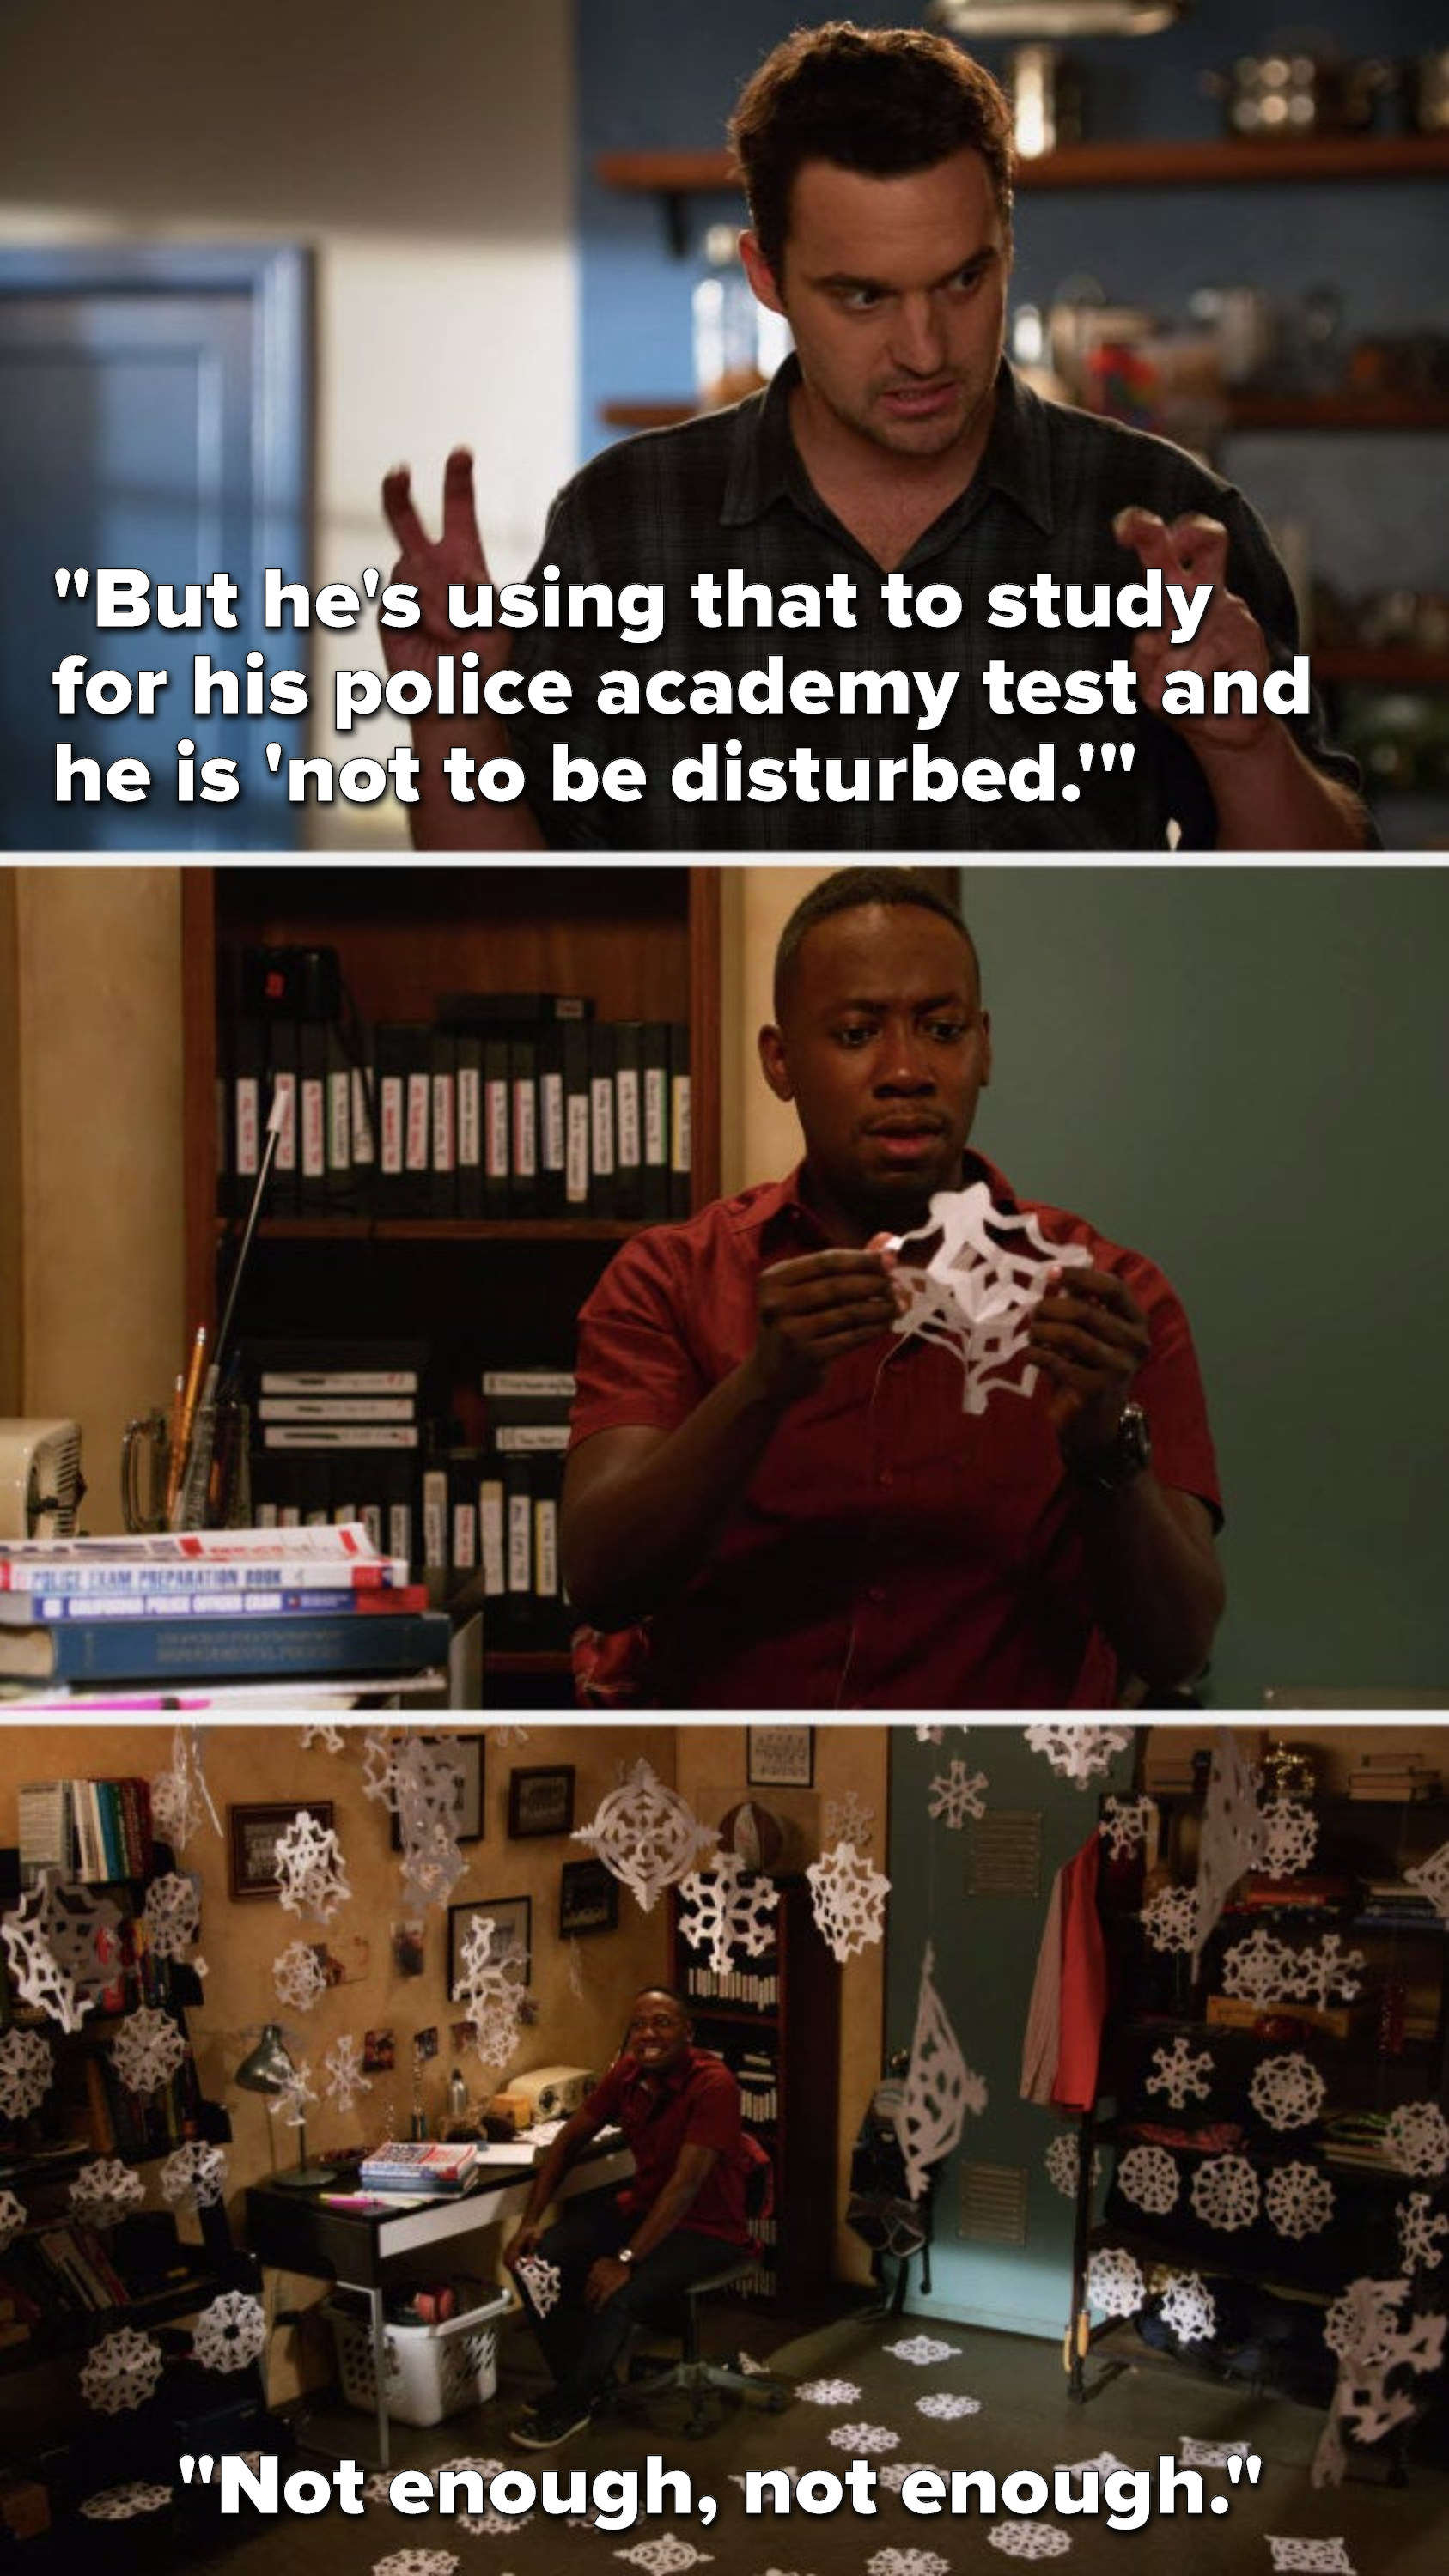 Nick says, But he&#x27;s using that to study for his police academy test and he is not to be disturbed, and we see Winston making a paper snowflake in his room, then we see that his room is covered in paper snowflakes and he says, not enough, not enough